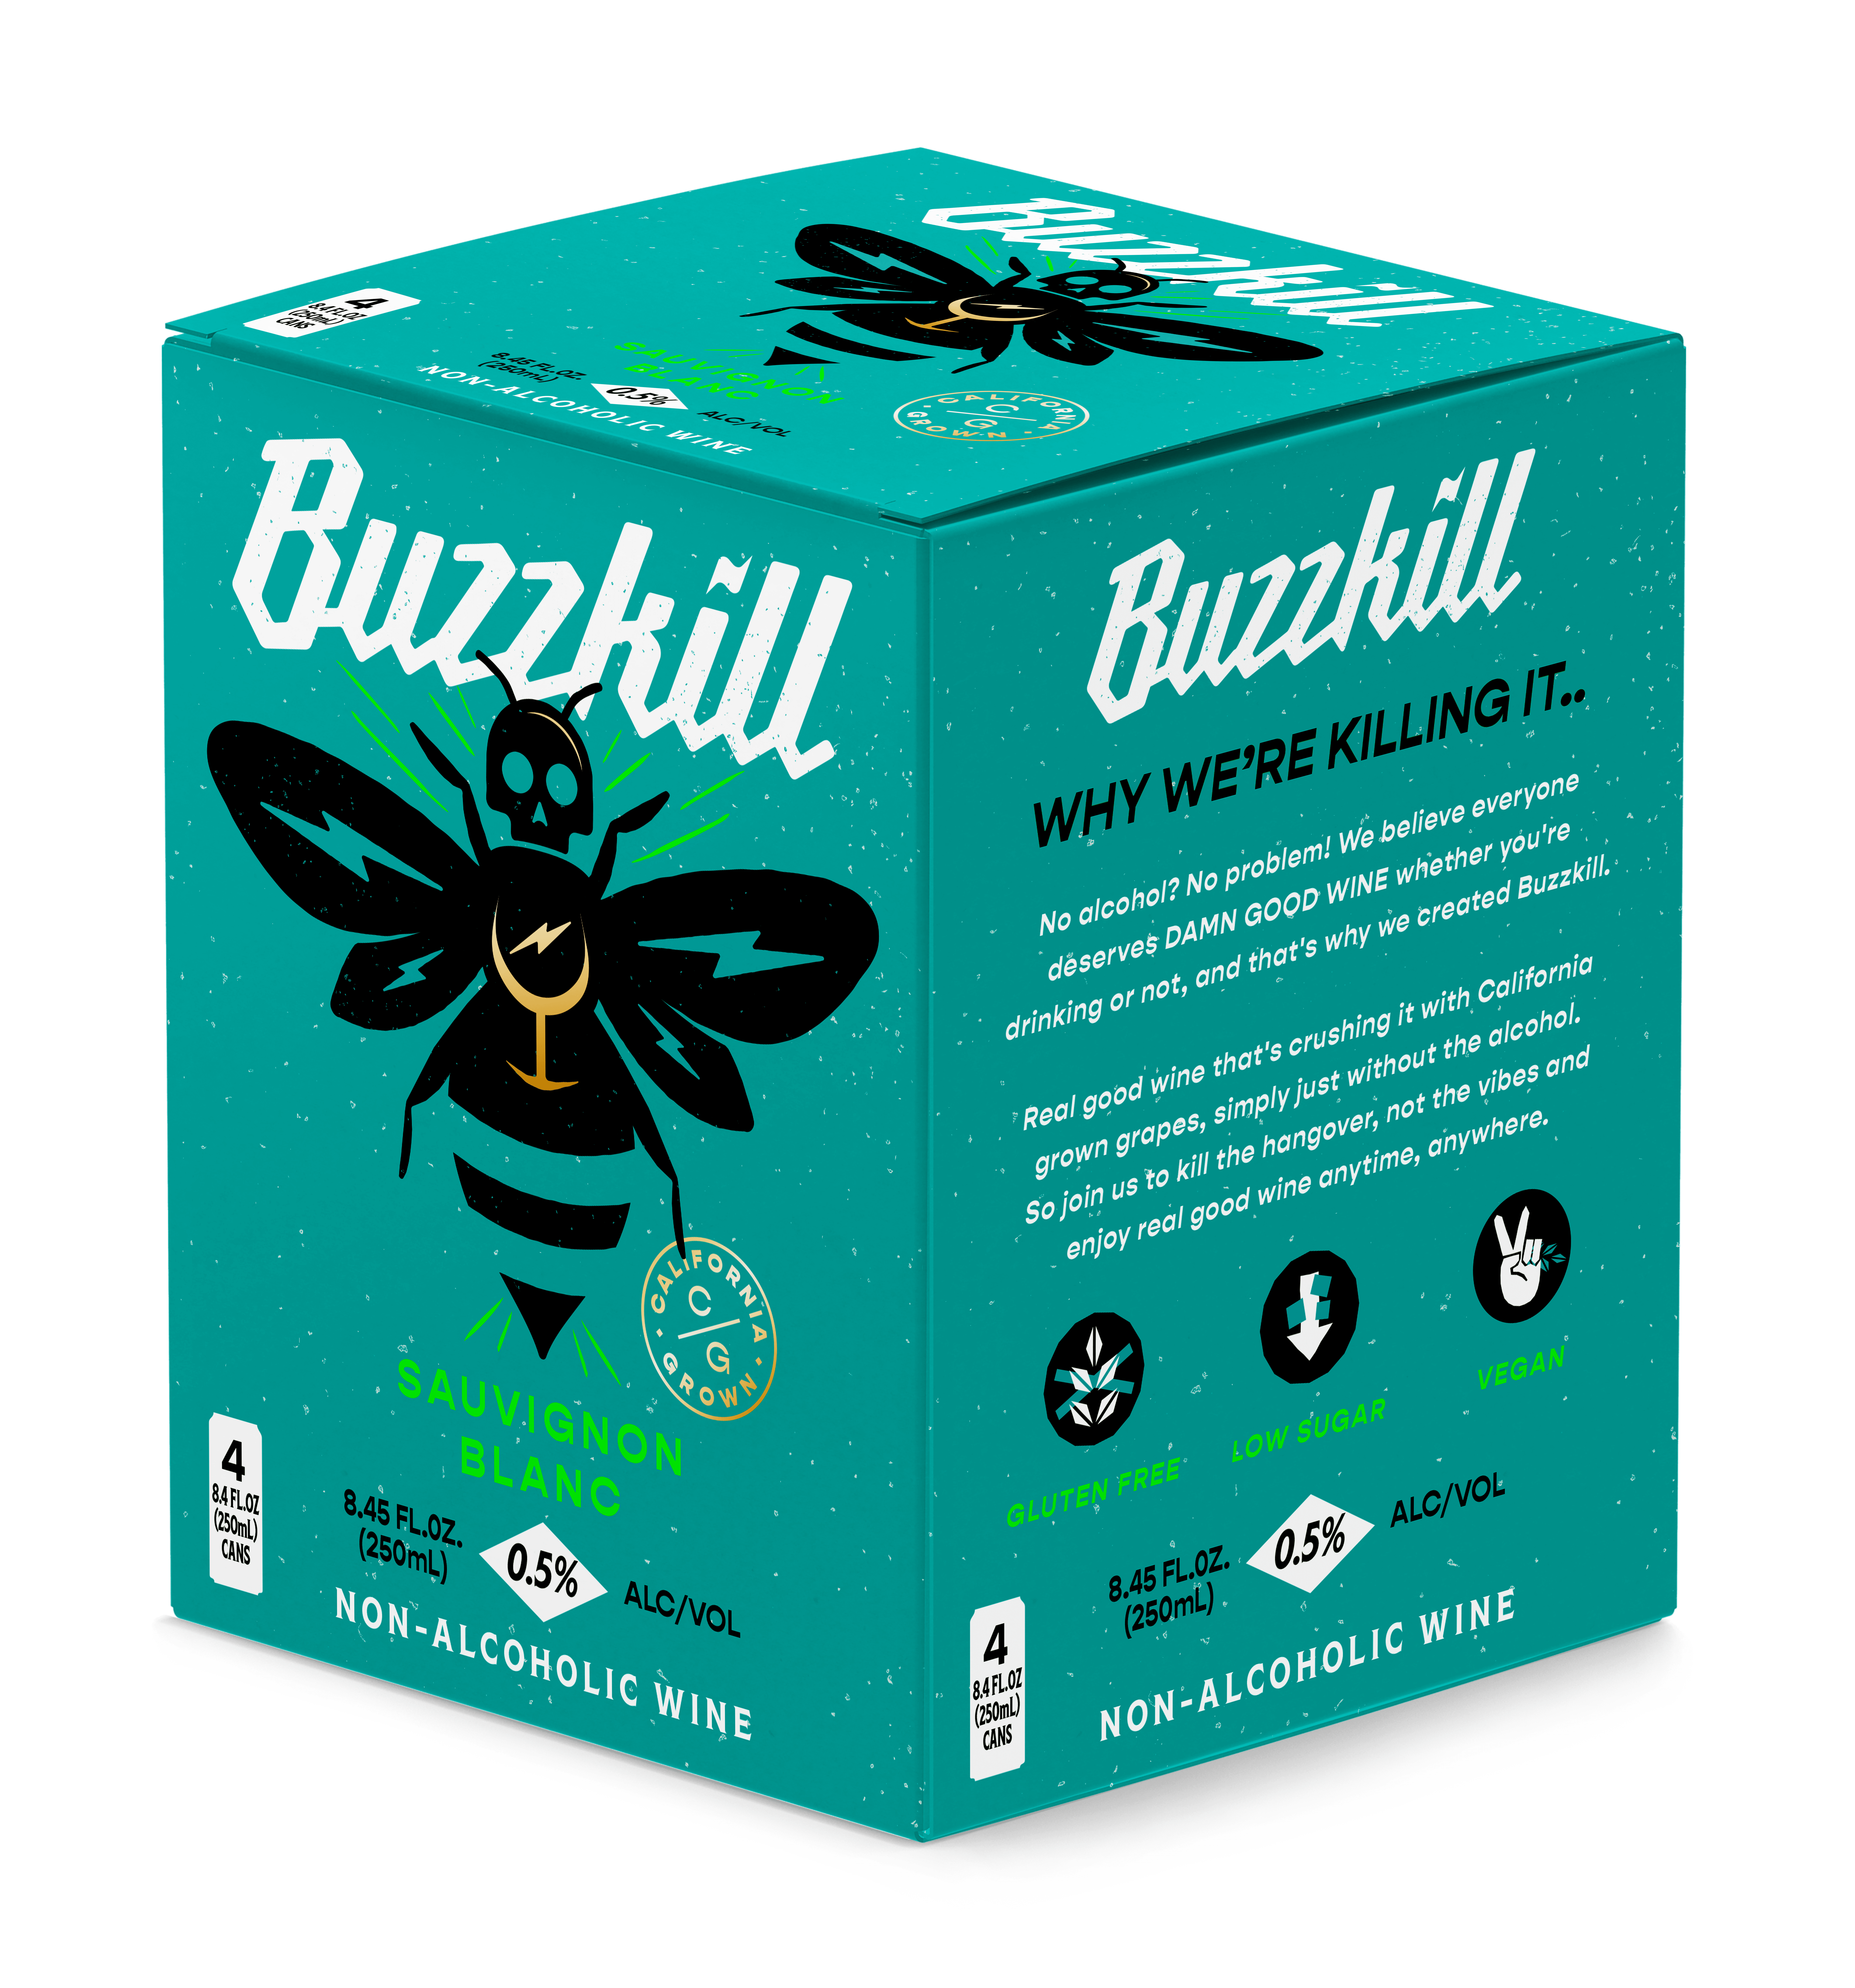 Buzzkill_Design_Development_Winging it_DO_4pack_Angled